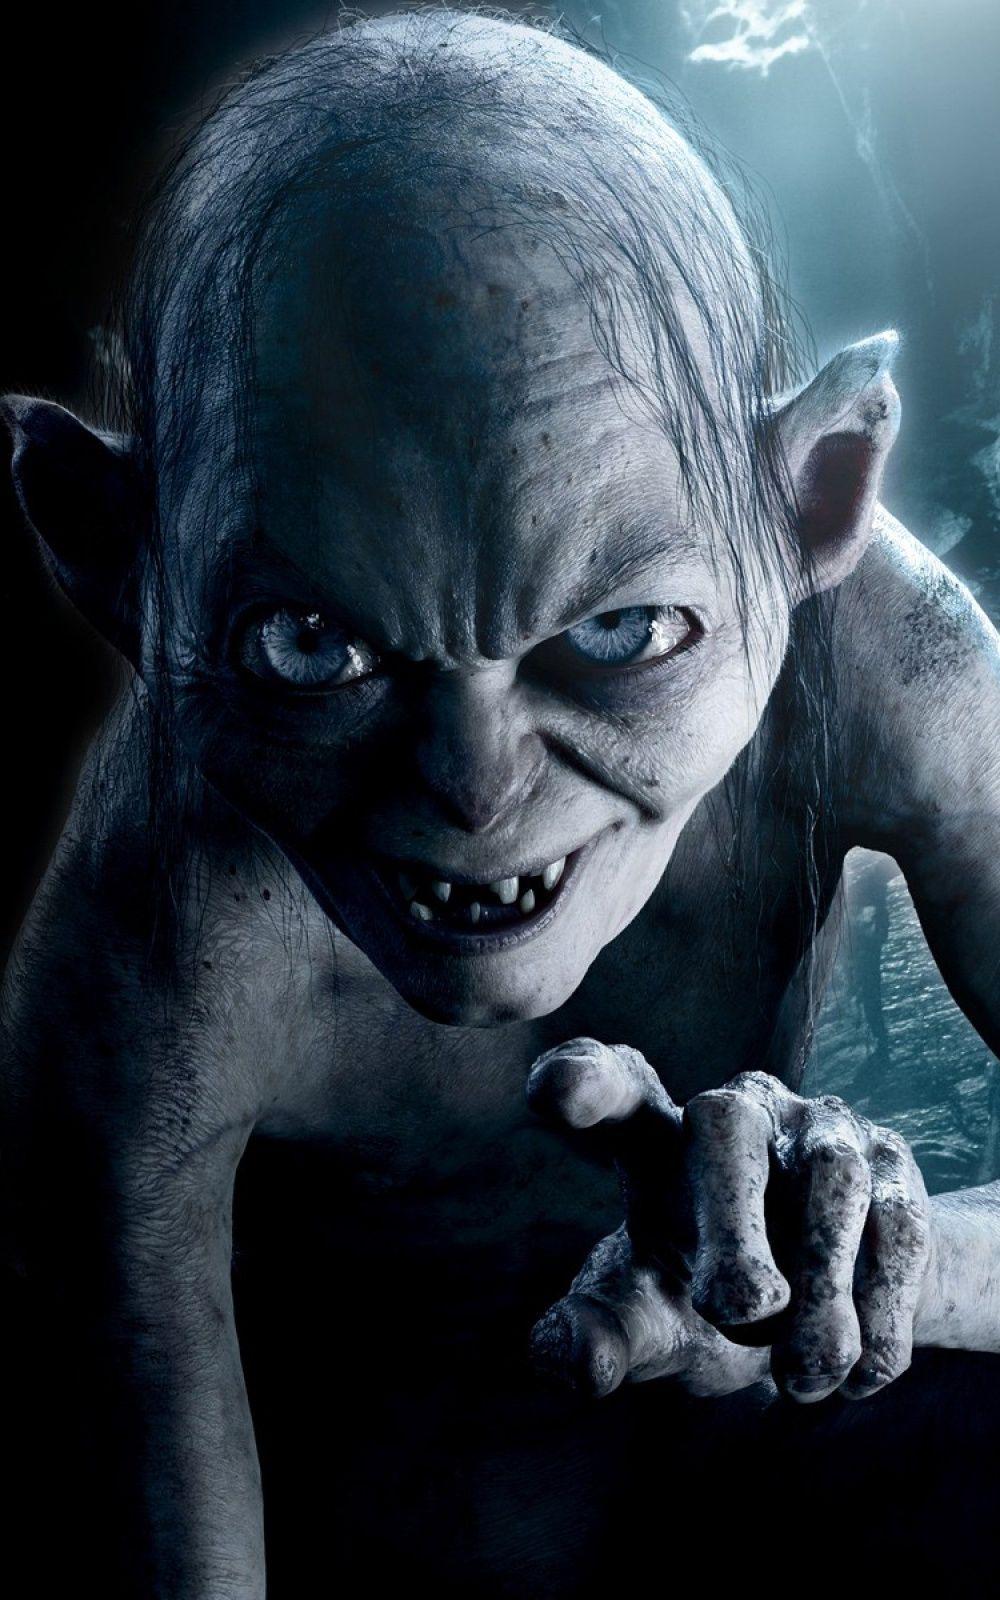 Gollum Lord Of The Rings Lockscreen Android Wallpaper free download